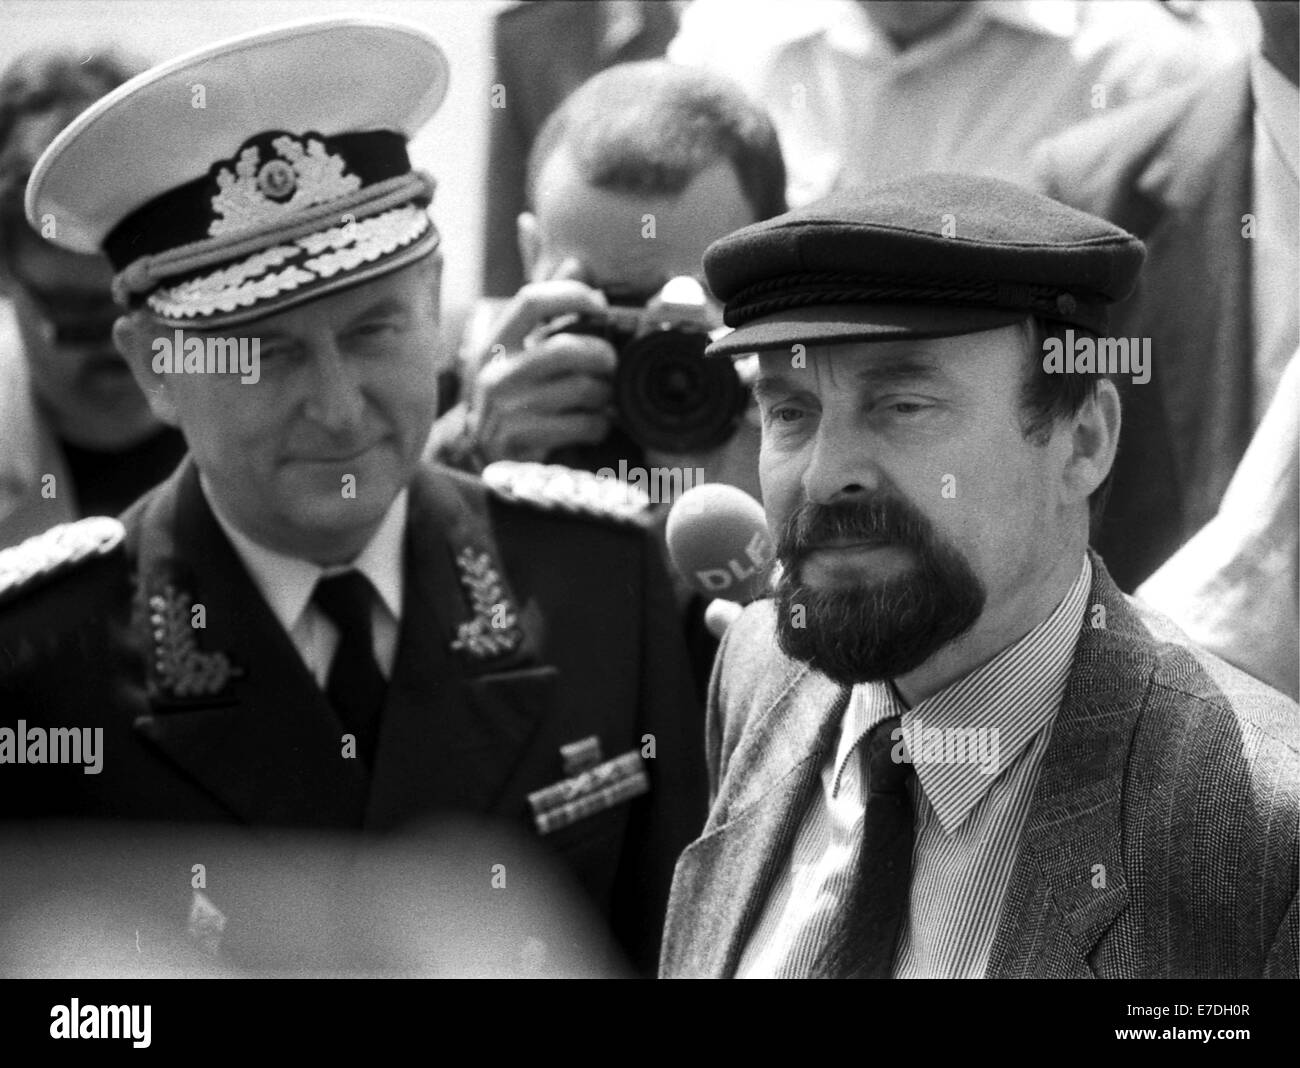 Former priest, GDR member of the opposition and new Minister for Disarmament and Defence Rainer Eppelmann (R) and head of the People's Navy, Admiral Theodor Hoffmann, on board of the submarine hunter 'Wismar' during Epelmann's inaugural visit to the navy on 18 June 1990. Eppelmann visited the modern submarine hunter ant talked to its crew. Photo: Juergen Sindermann -NO WIRE SERVICE- Stock Photo